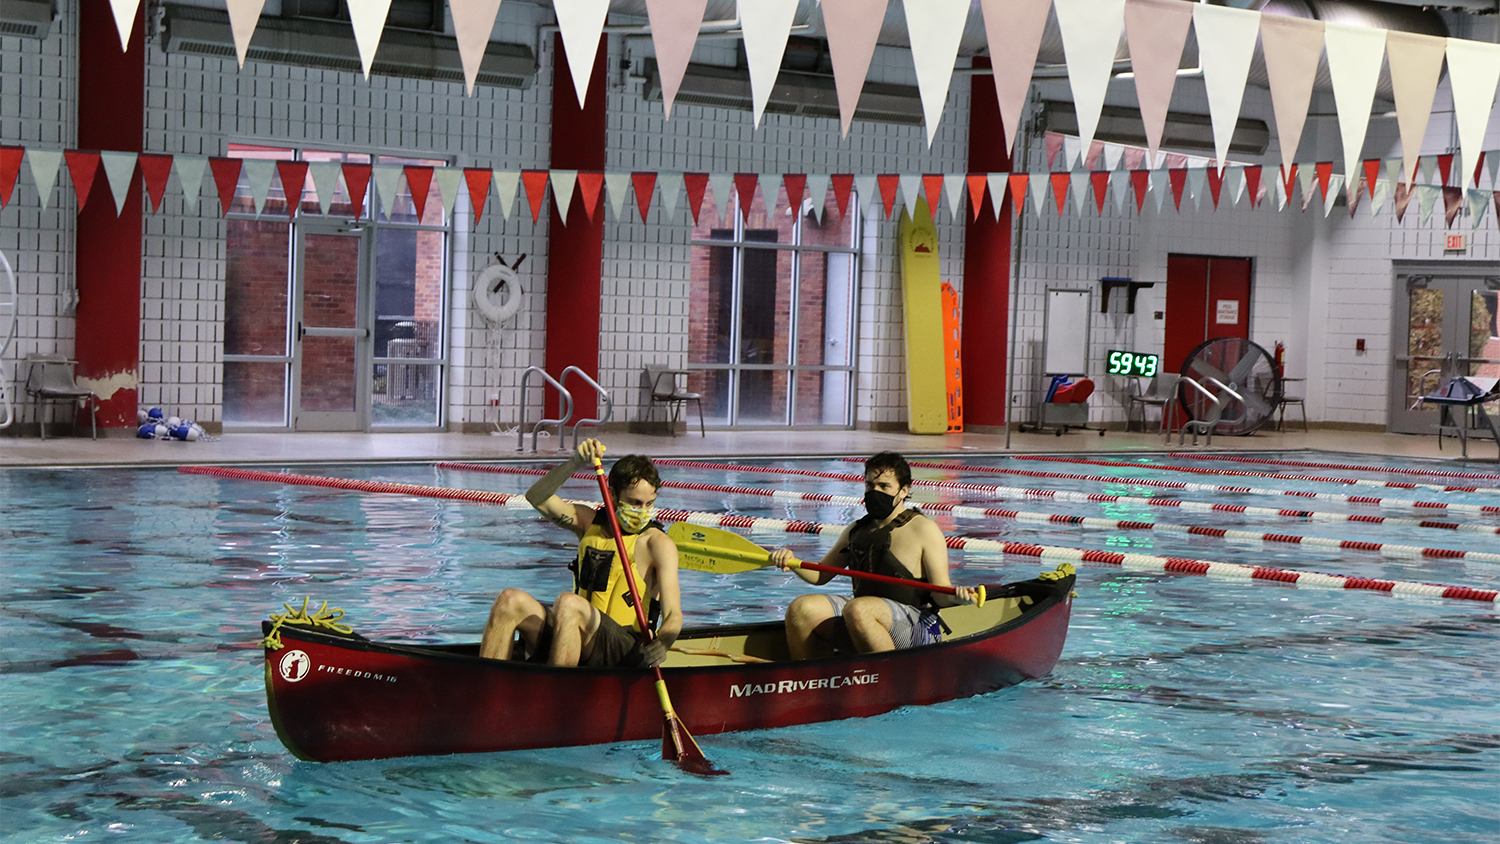 Two students use paddles in a canoe in an indoor swimming pool